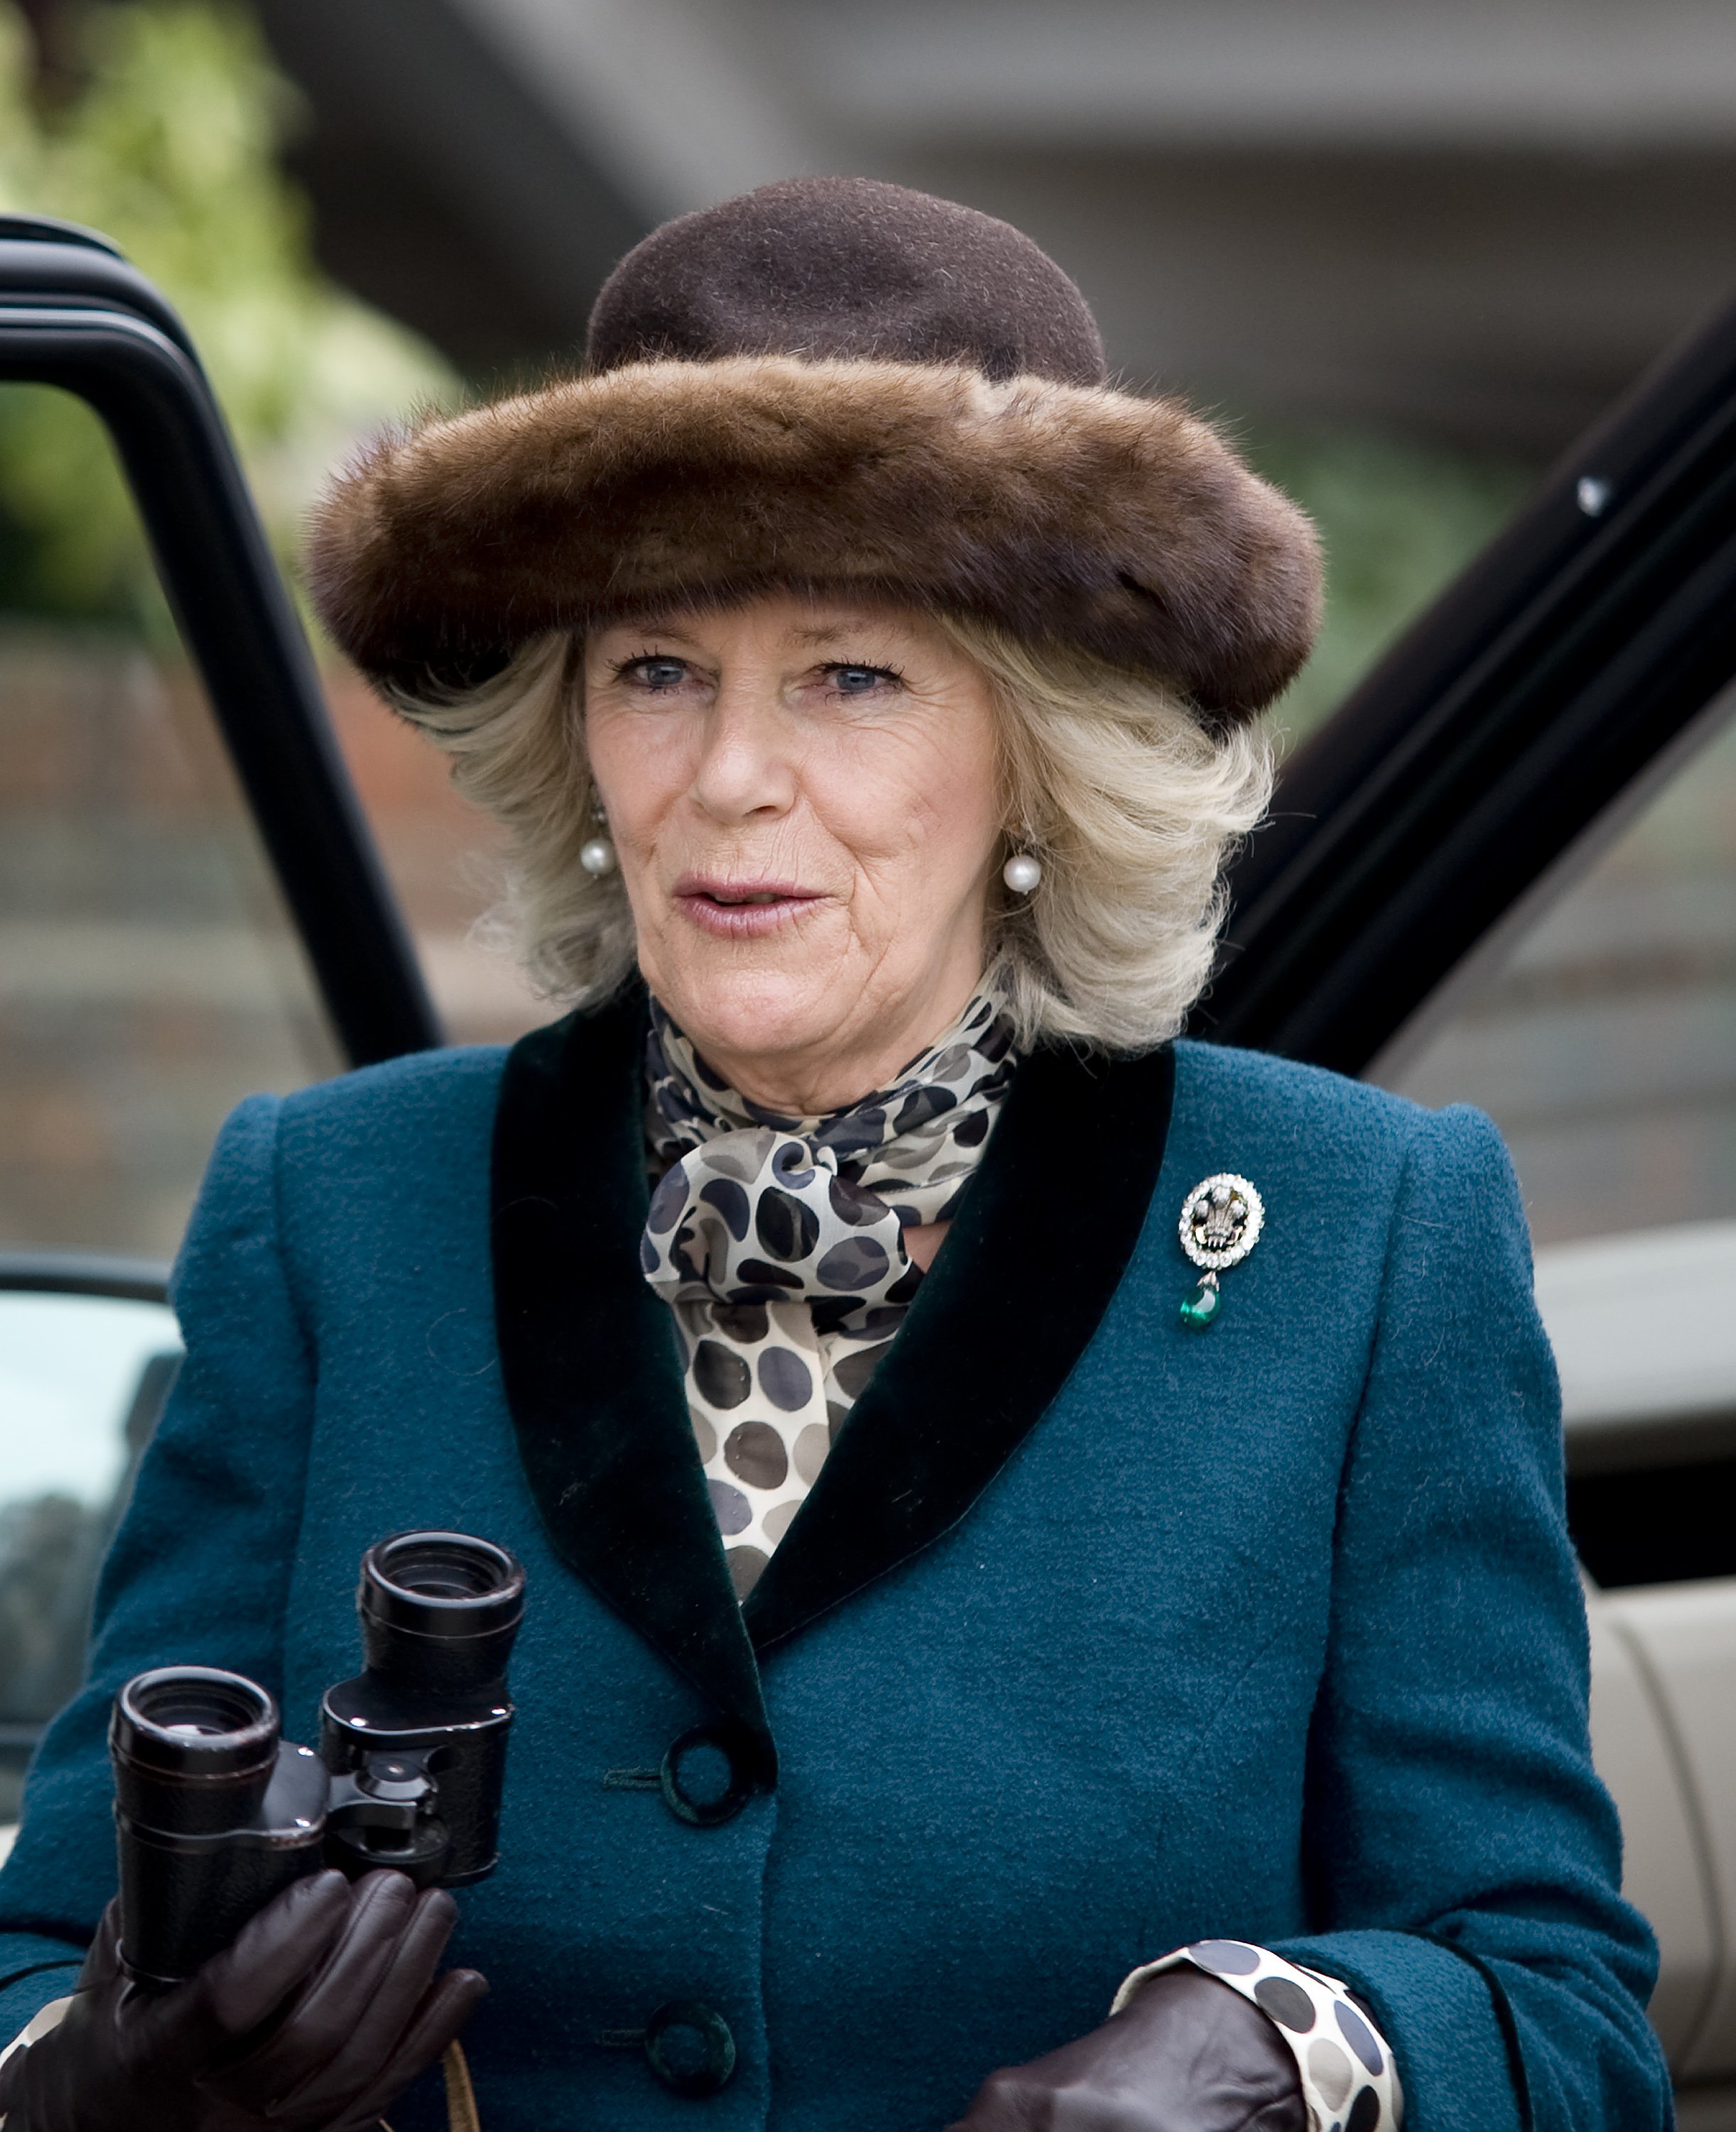  Camilla, Duchess of Cornwall arrives at Cheltenham racecourse on ladies day during day two of the Cheltenham Festival on March 14, 2012 in Cheltenham, England | Source: Getty Images 